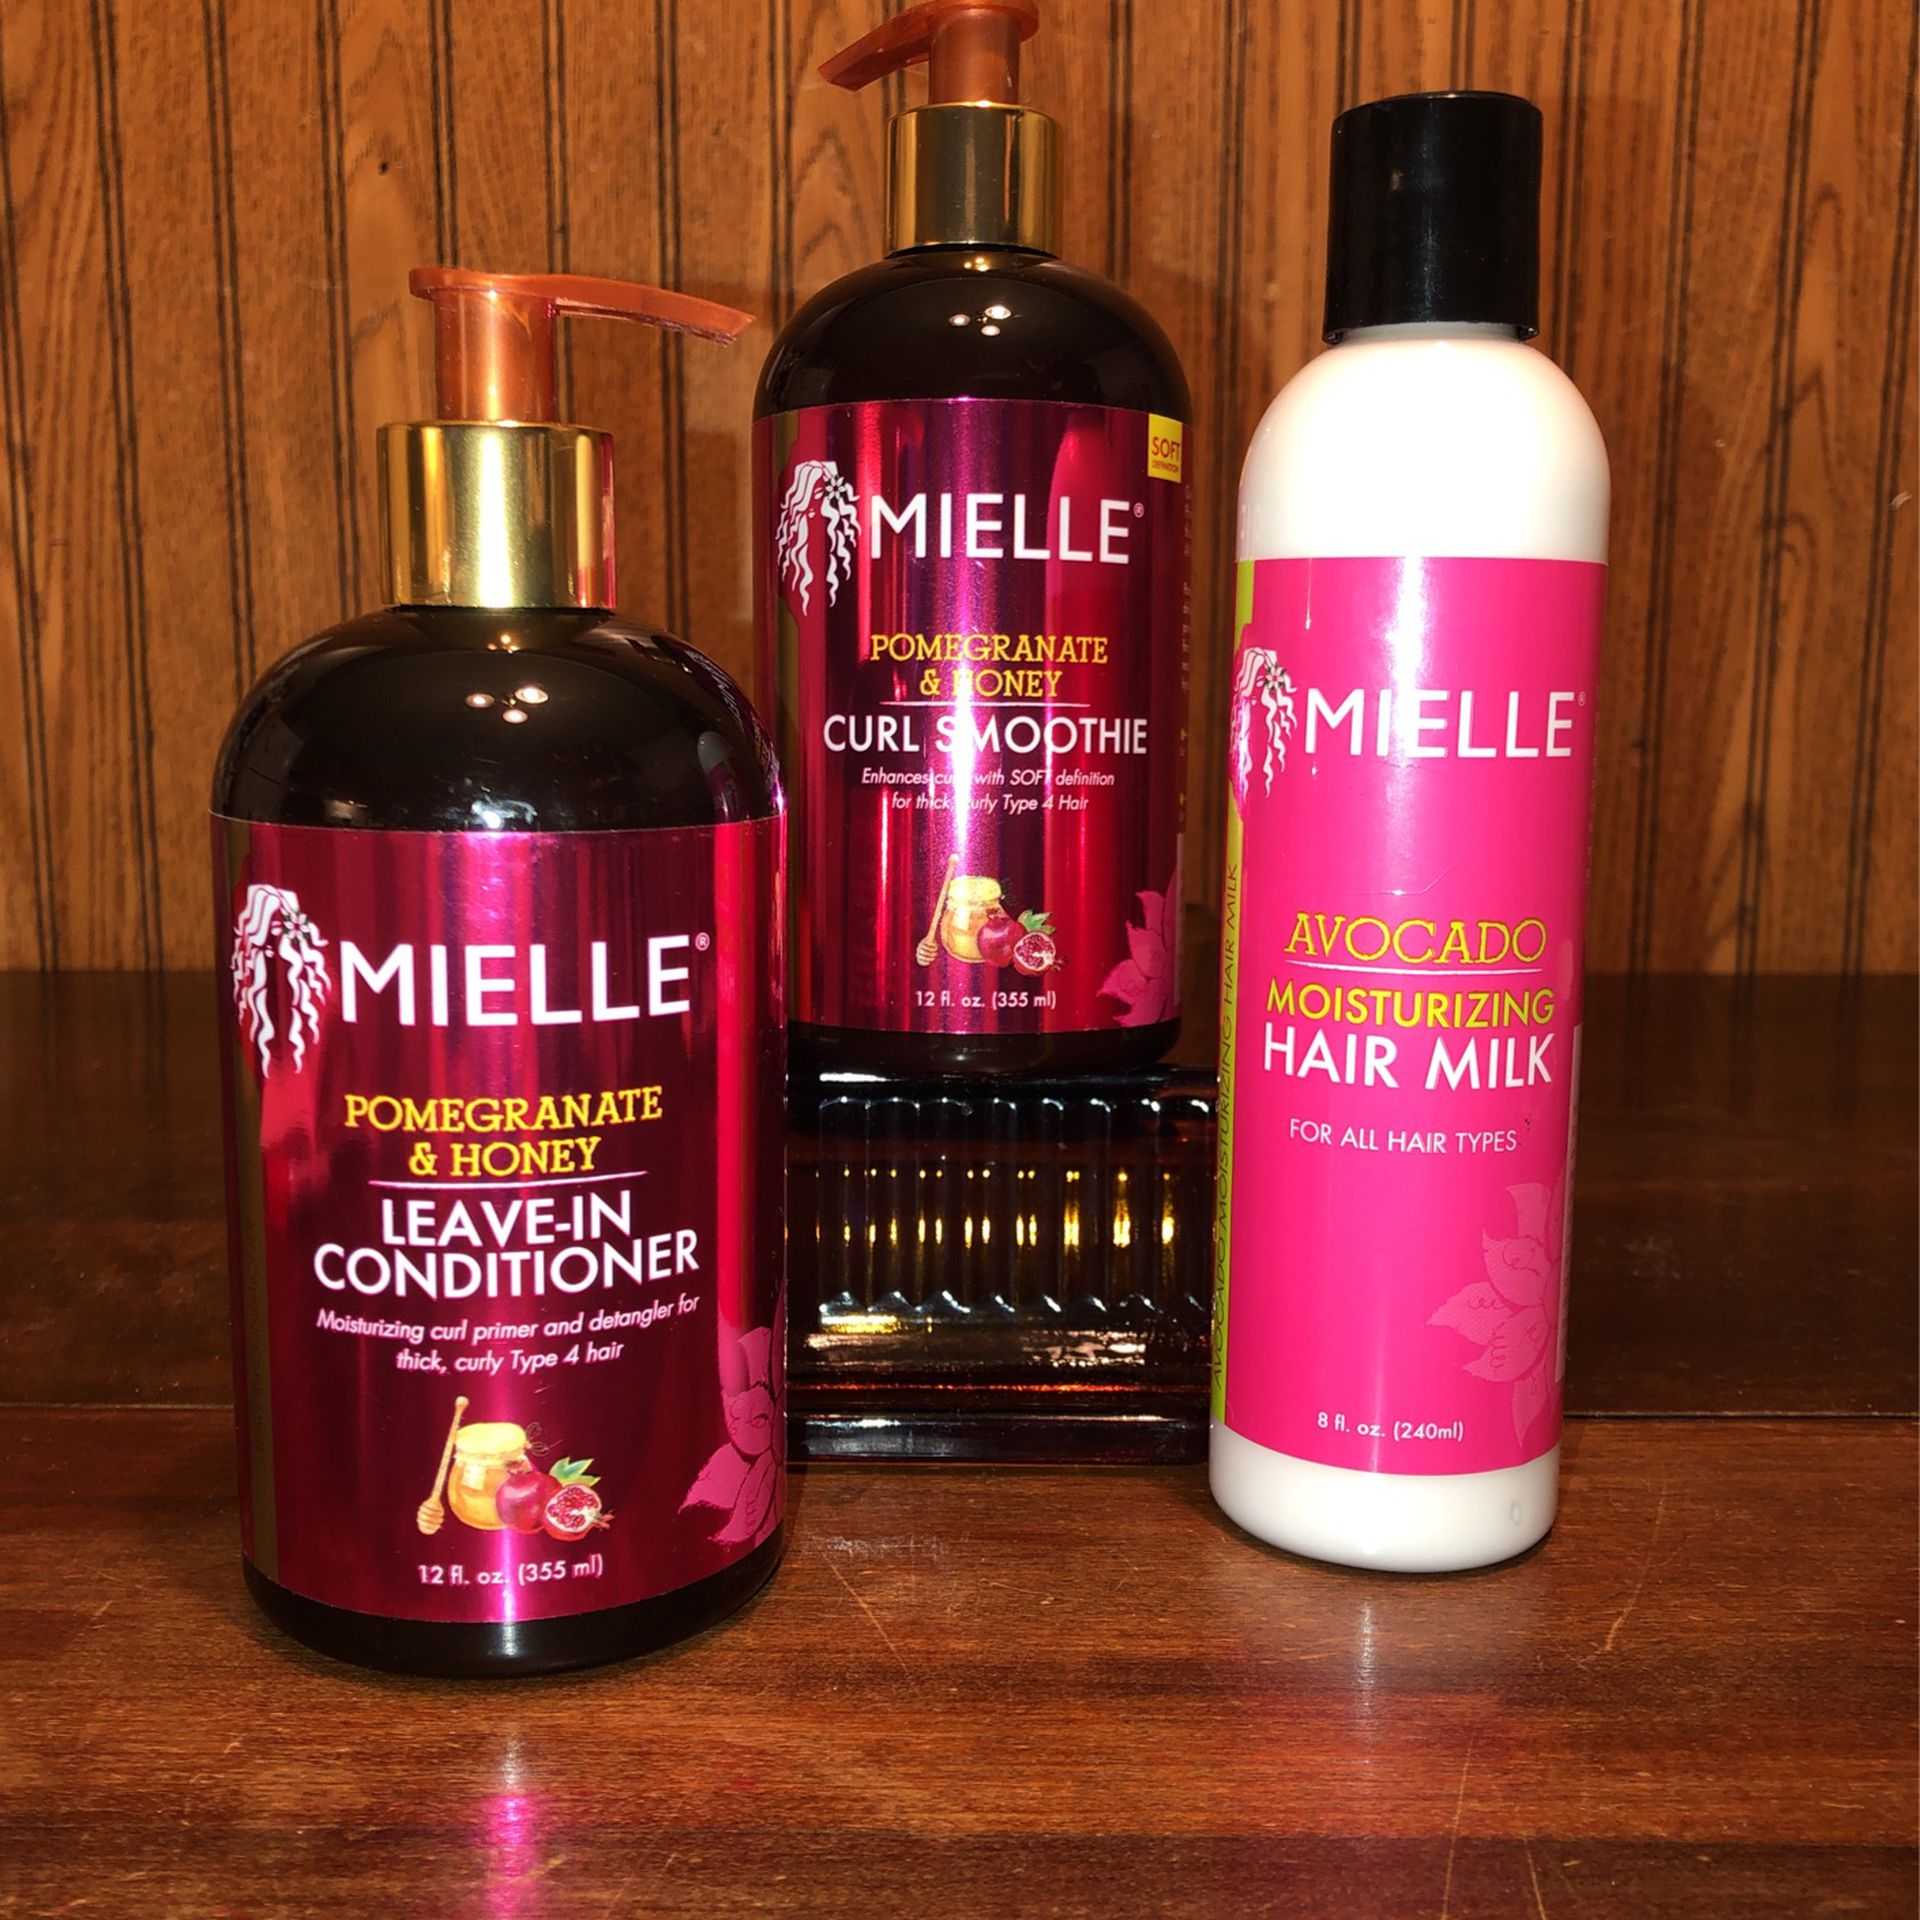 All Brand NEW! 🎆 Mielle brand Hair Care Products -Pomegranate Honey (((PENDING PICK UP TODAY)))